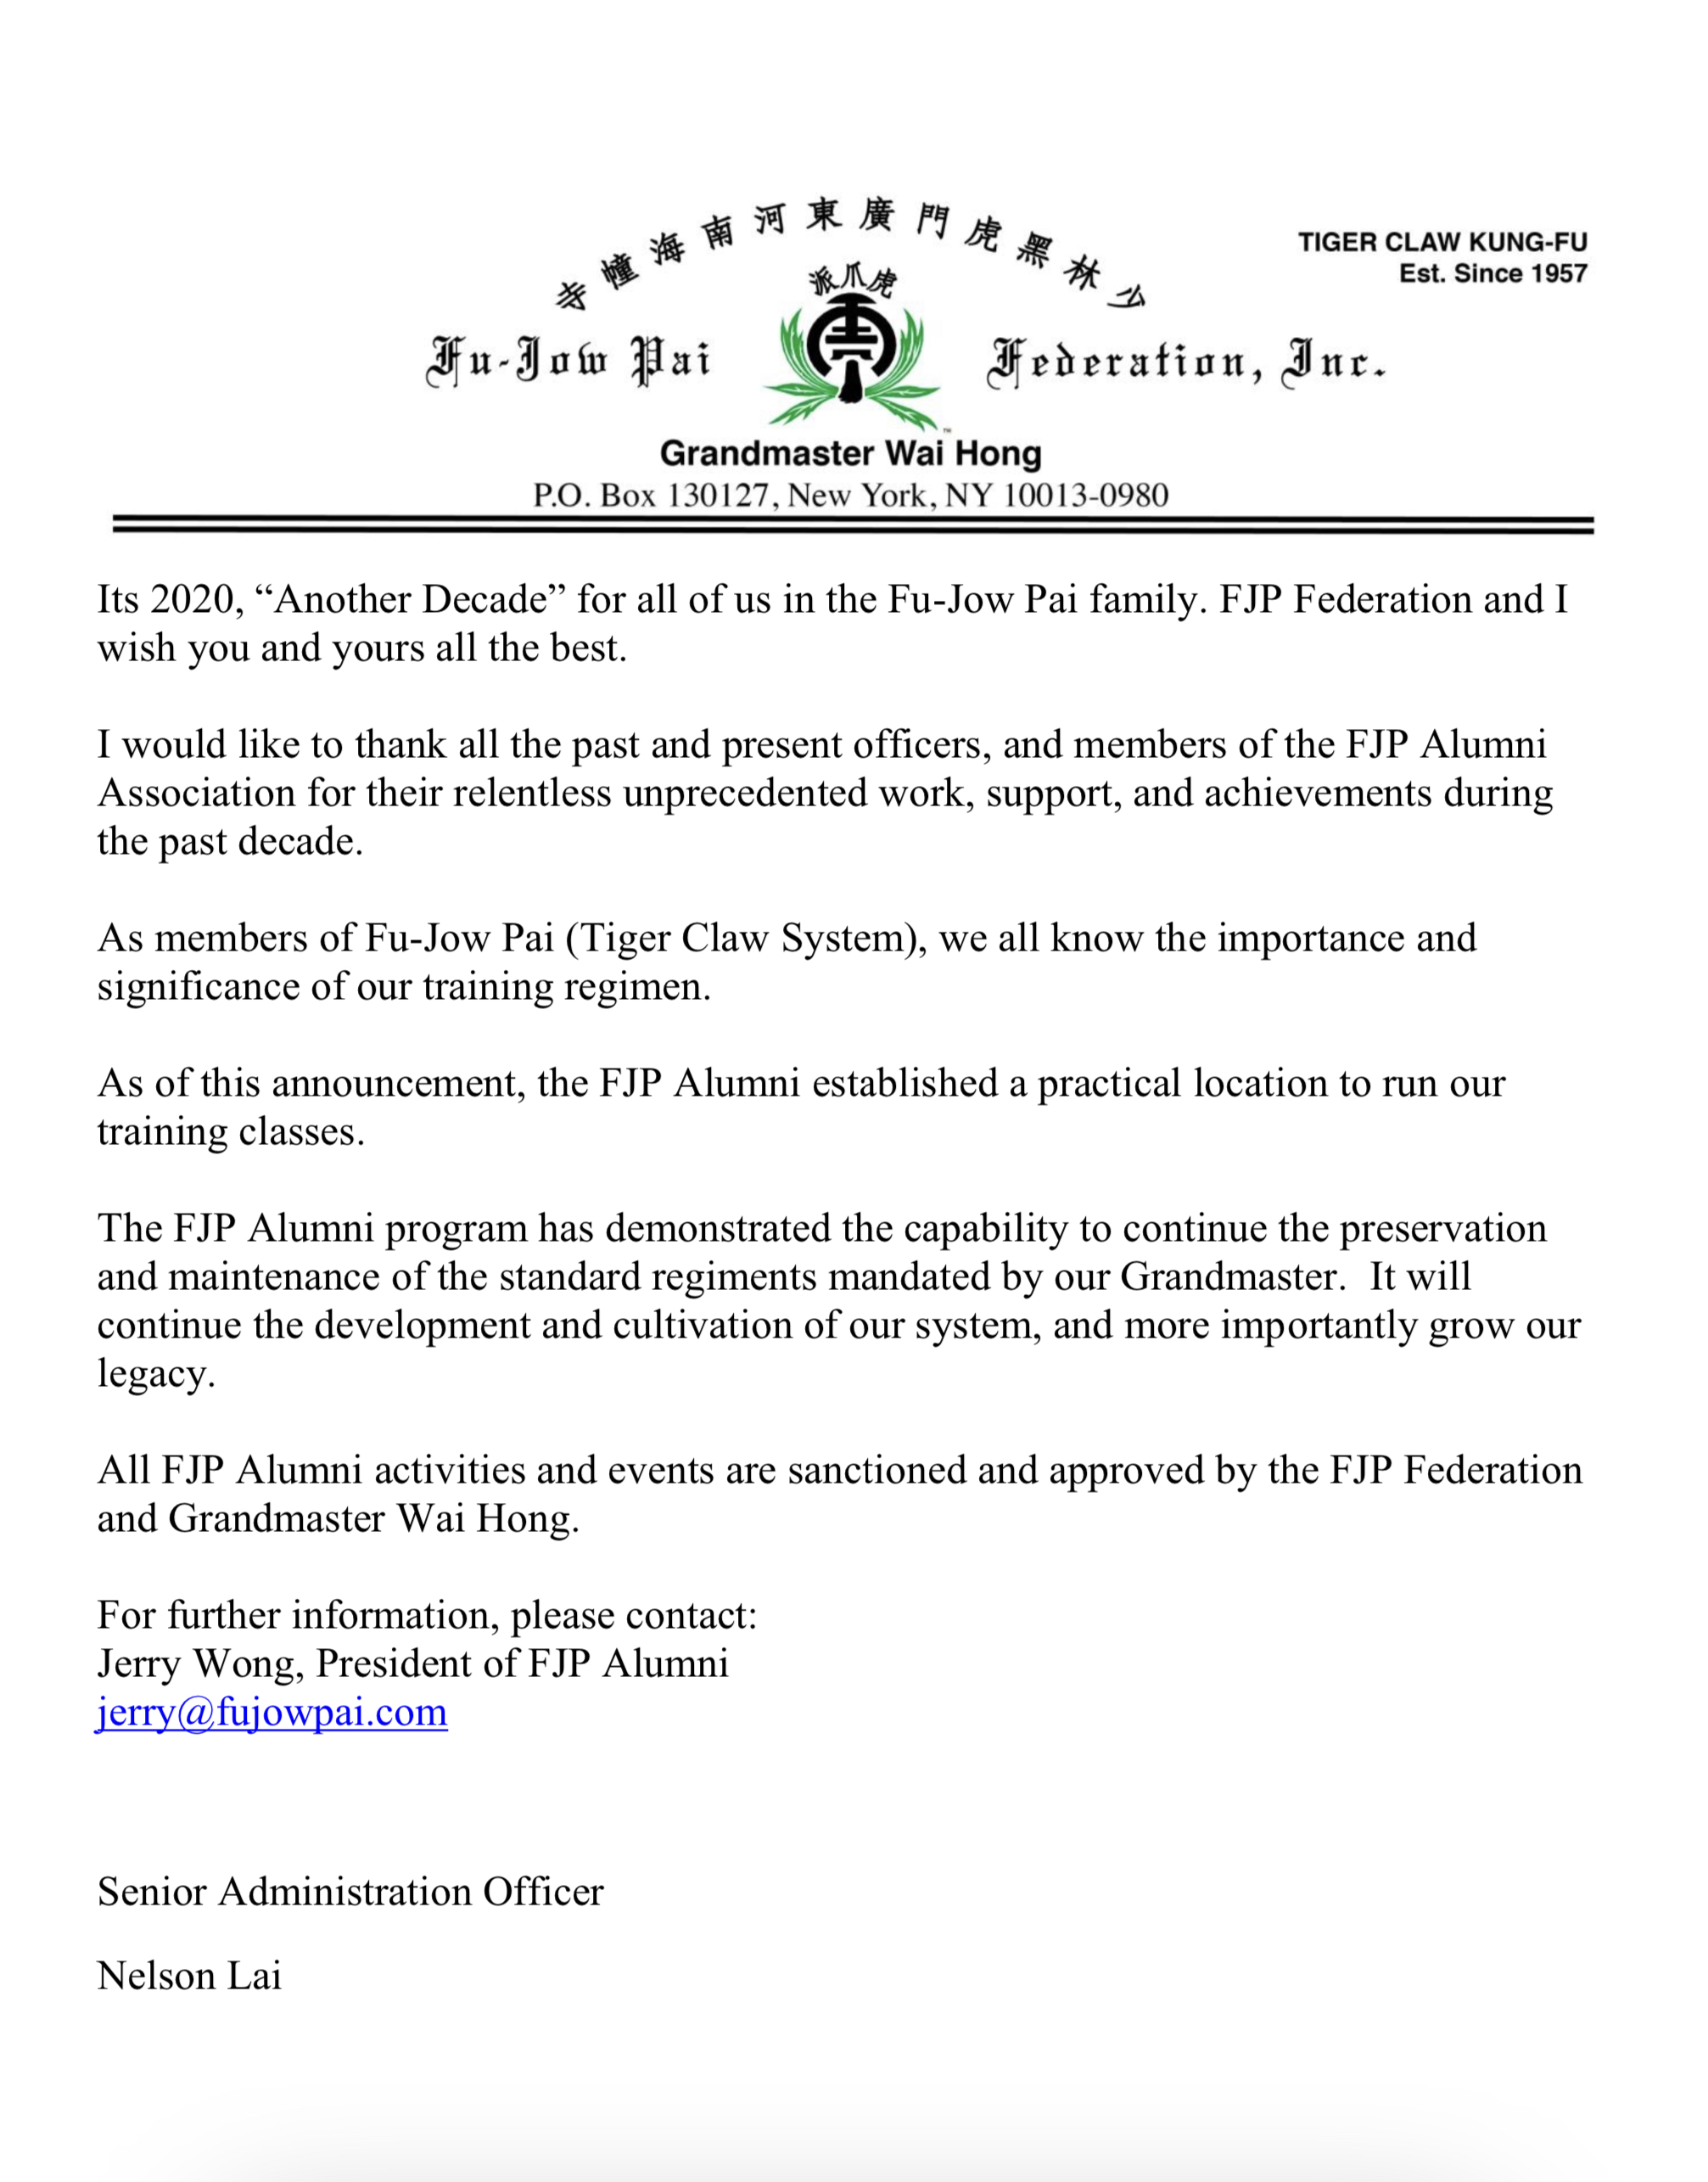 Official Fu-Jow Pai Document